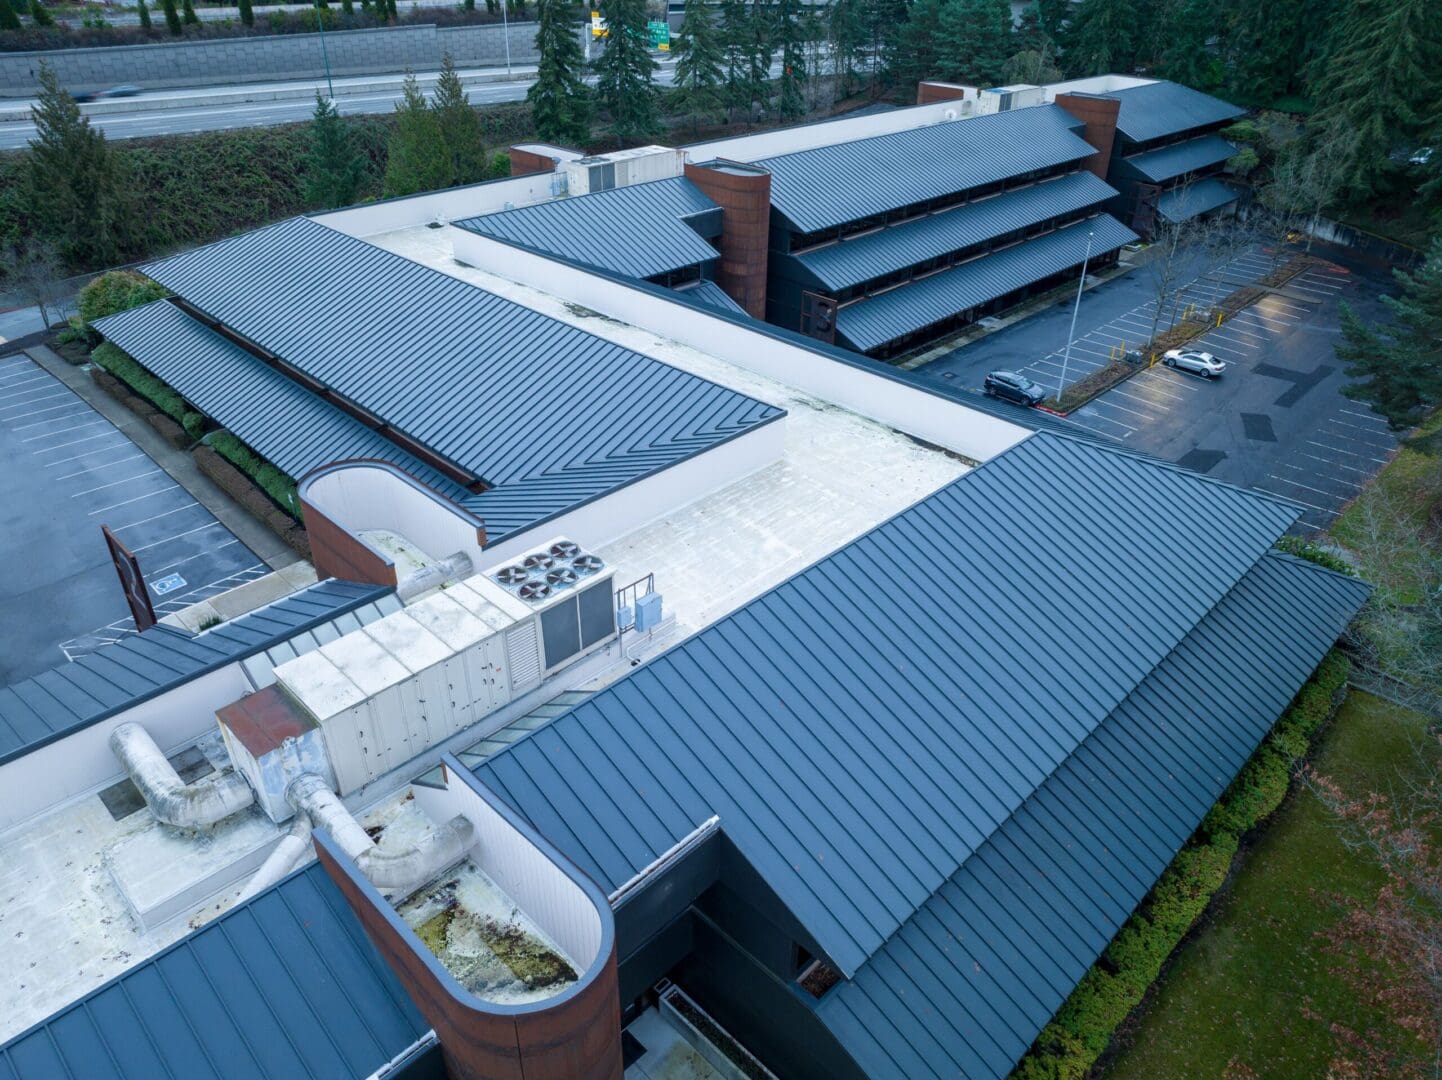 An aerial view of a building with a metal roof.